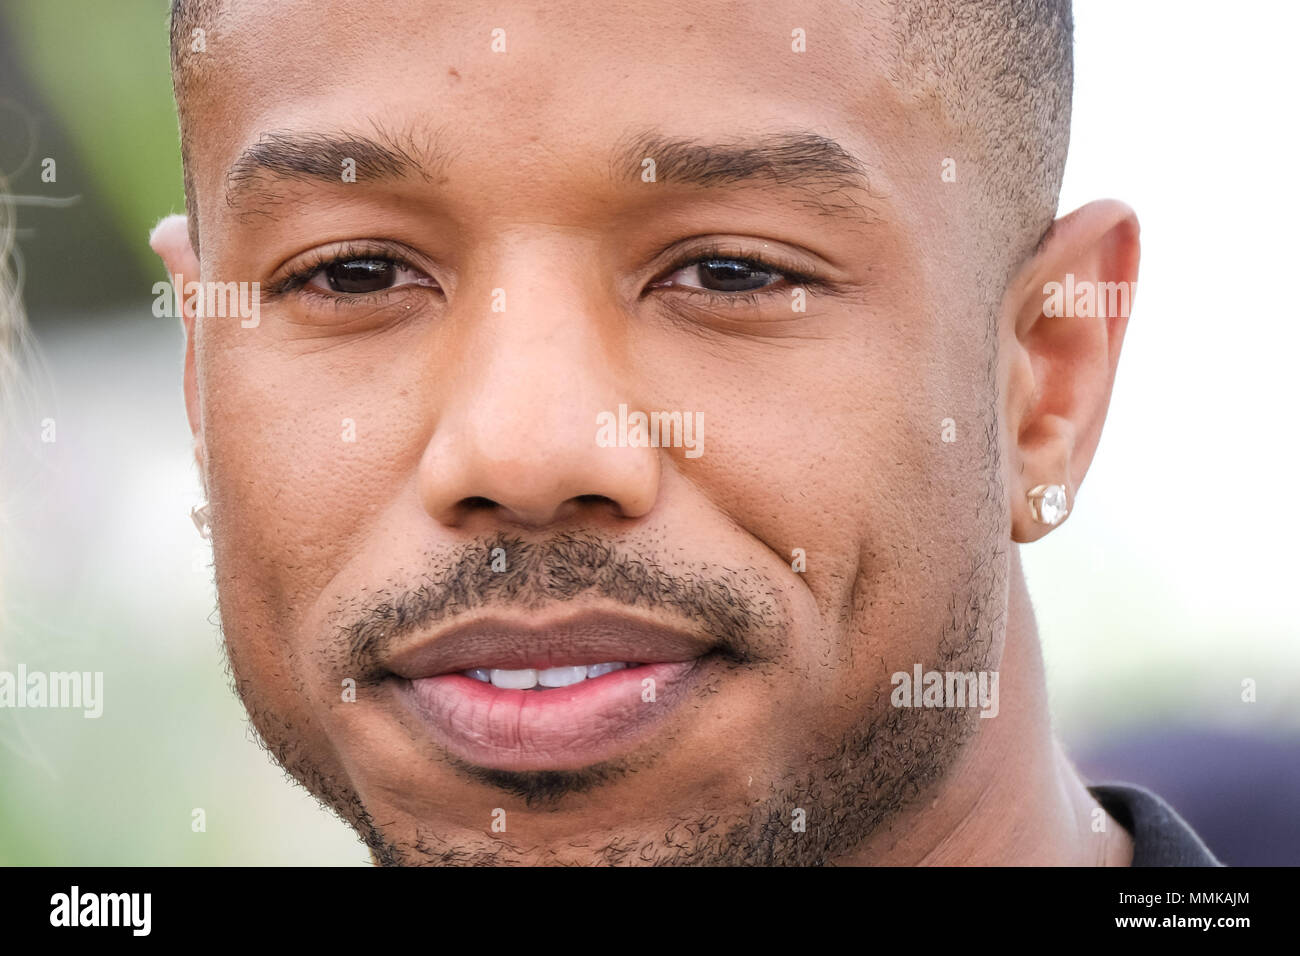 Cannes, France. 12th May 2018. Michael B Jordan at the 'Fahrenheit 451' photocall on Saturday 12 May 2018 as part of the 71st Cannes Film Festival held at Palais des Festivals, Cannes. Pictured: Michael B Jordan. Picture by Julie Edwards. Credit: Julie Edwards/Alamy Live News Stock Photo